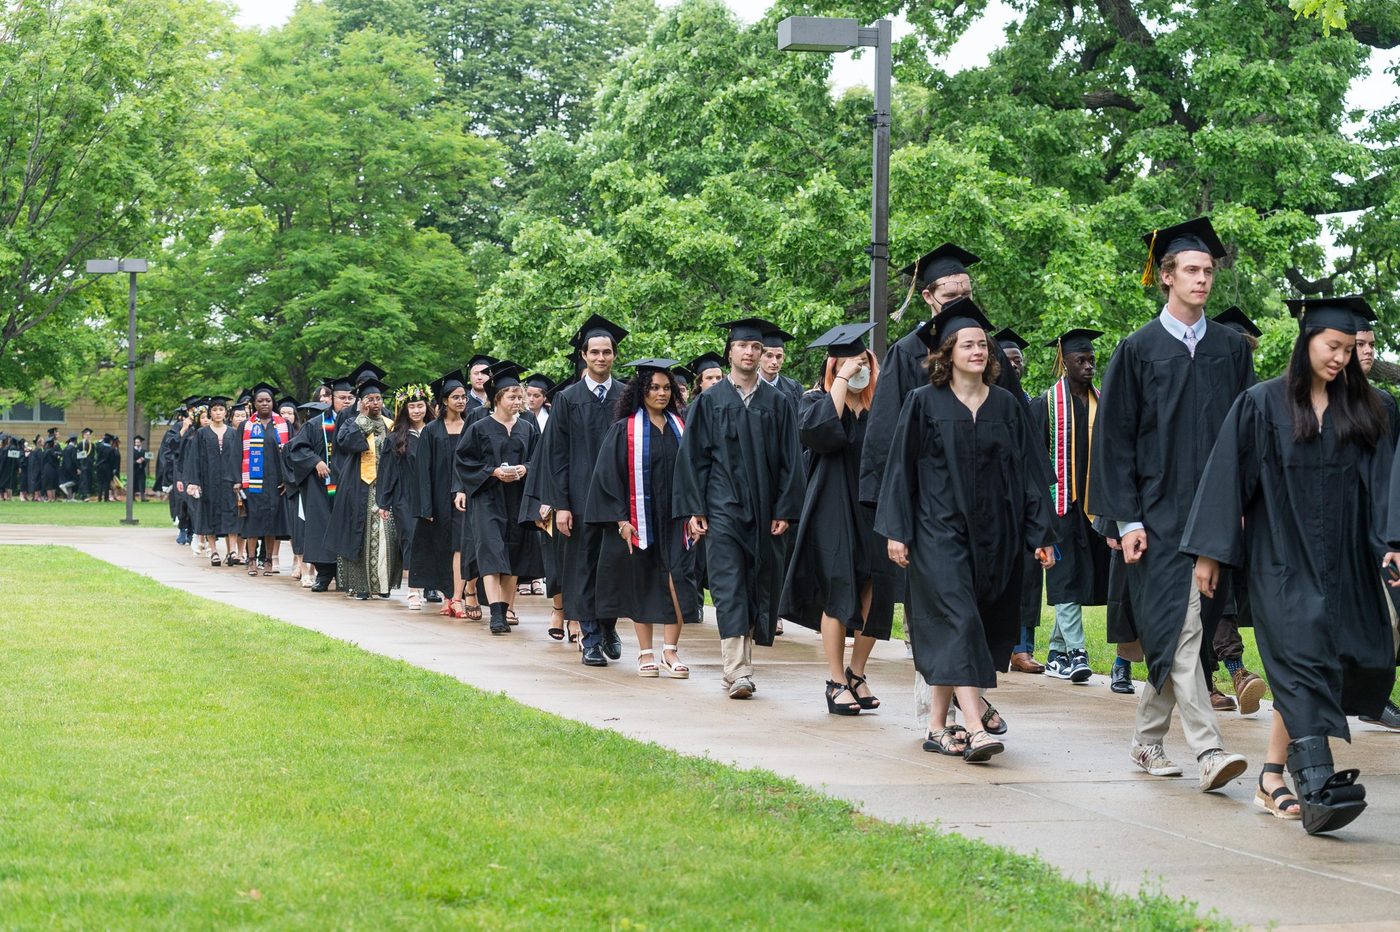 graduating students walking in line to commencement